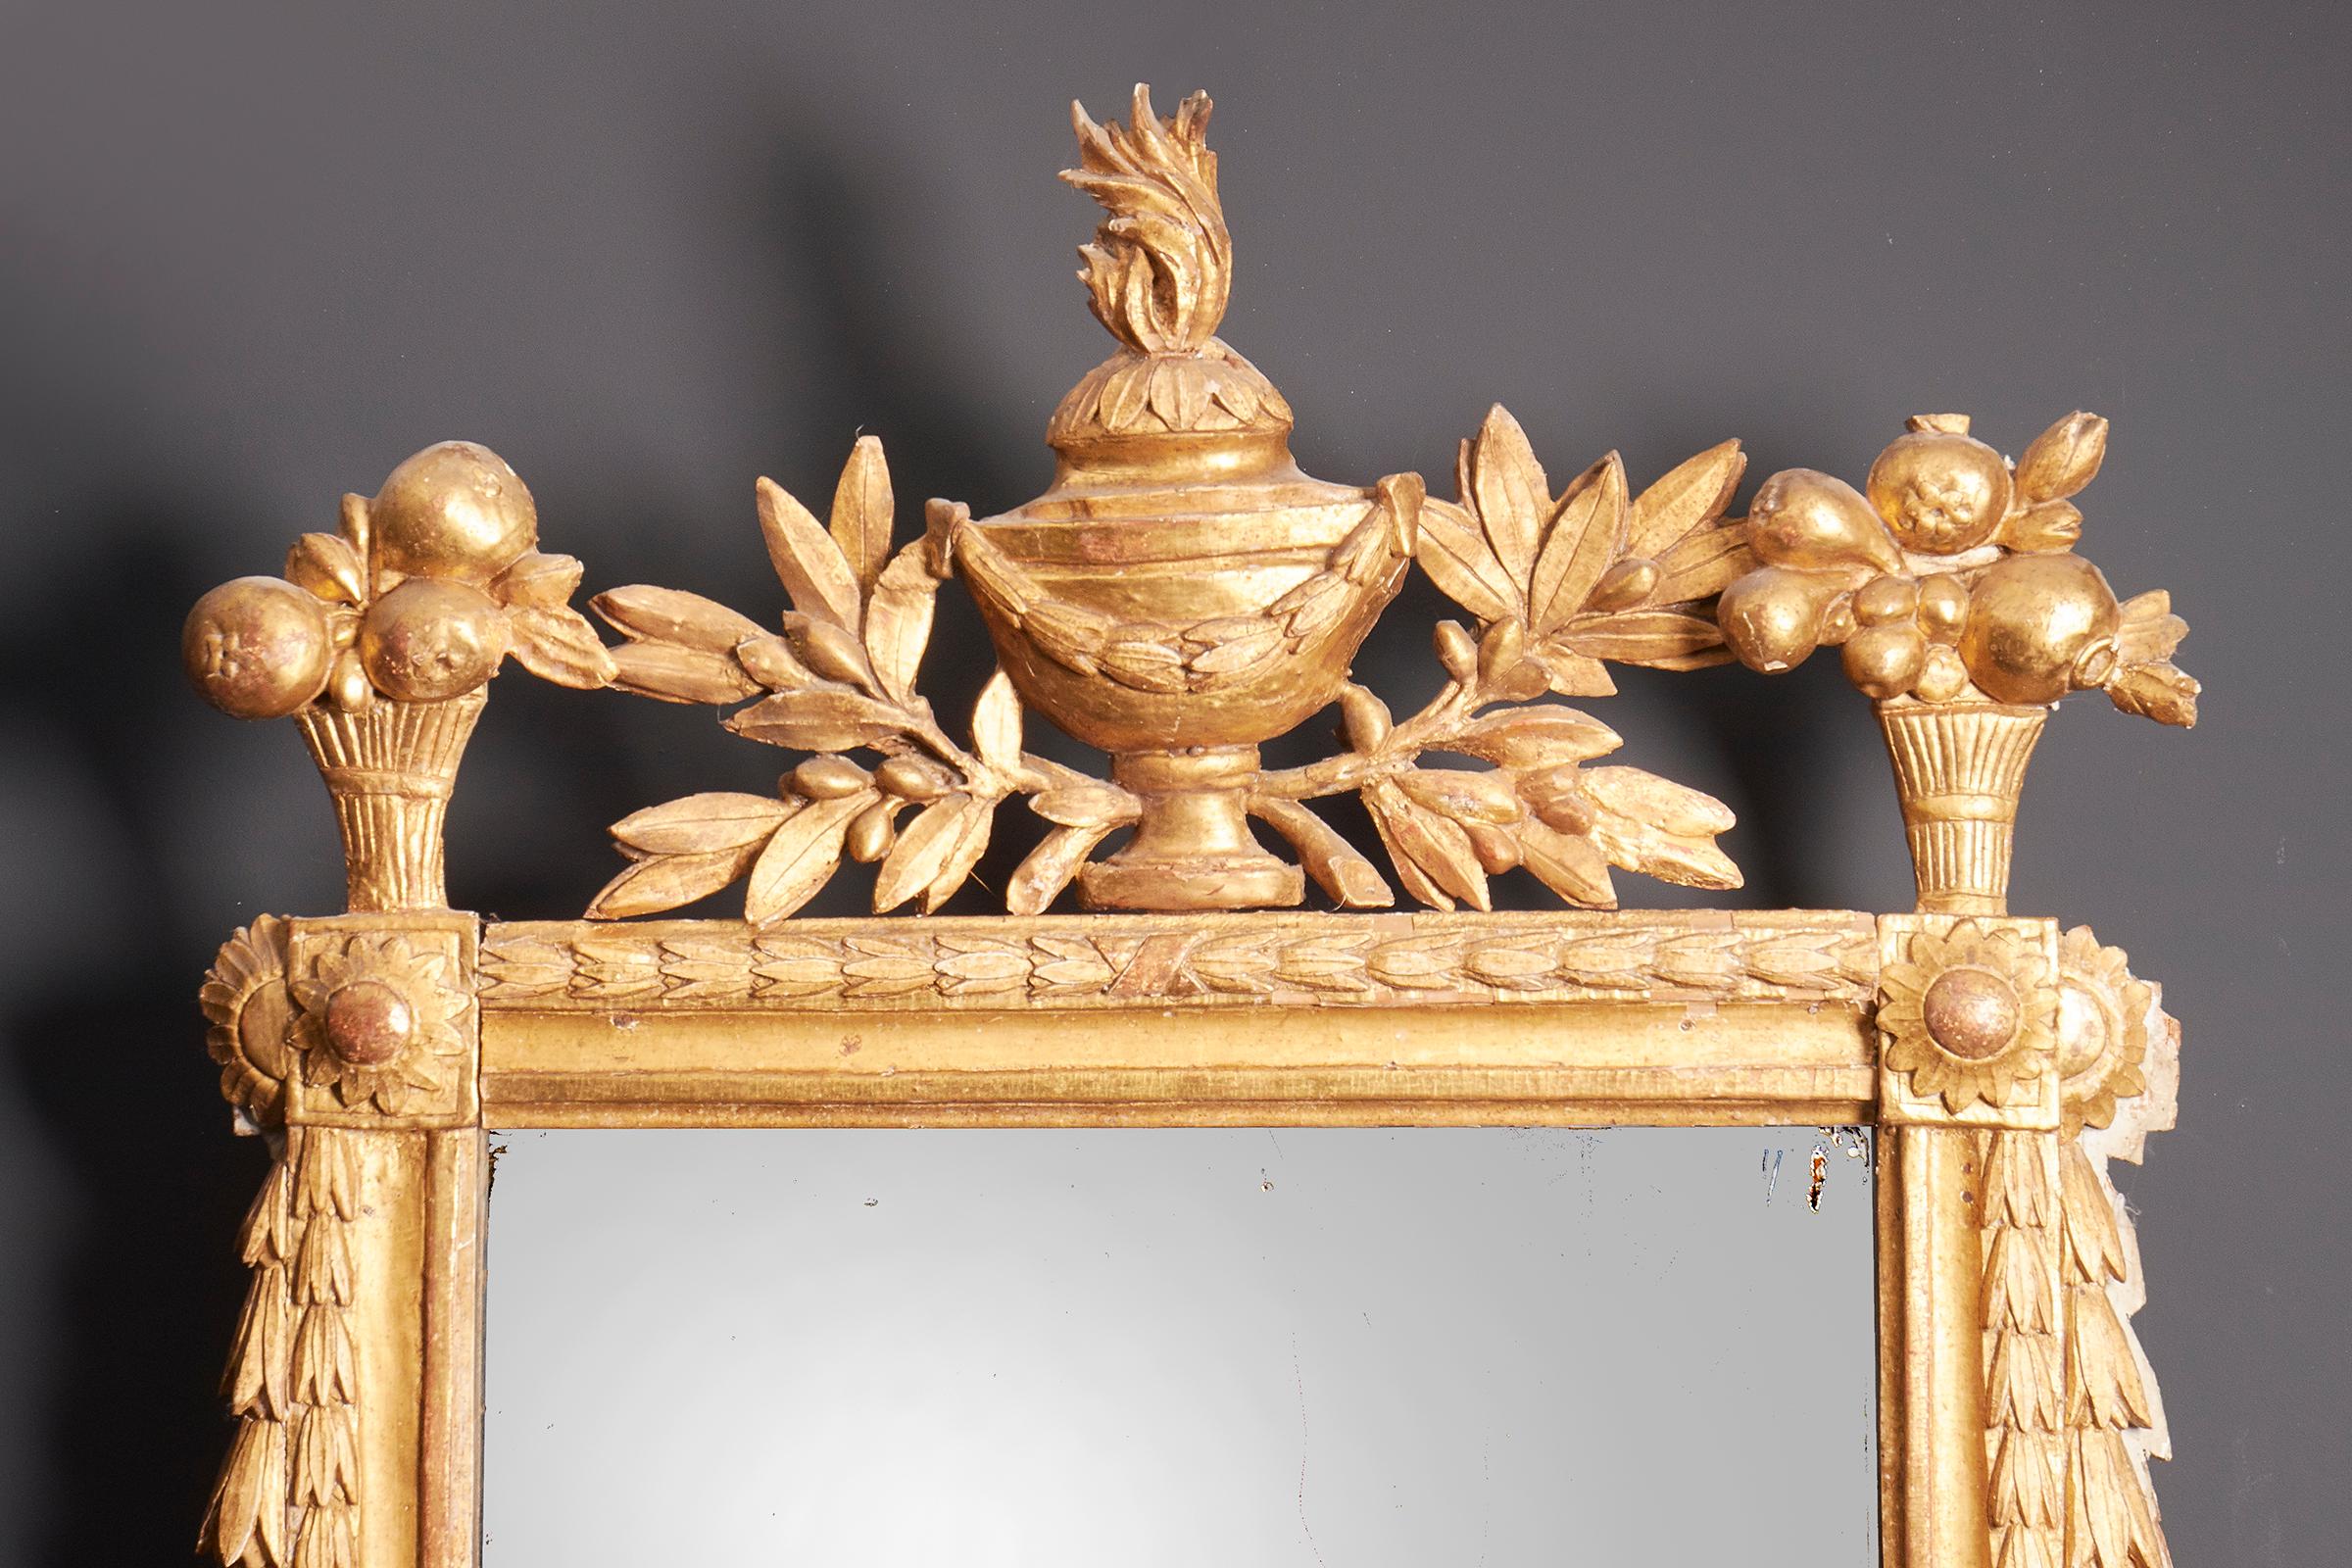 A neoclassical carved giltwood wall mirror, France, late 18th century, circa 1770-1790, elaborately carved frieze decor, the corners each with a sunflower, the crest with an urn and swags, the plate an historic replacement.